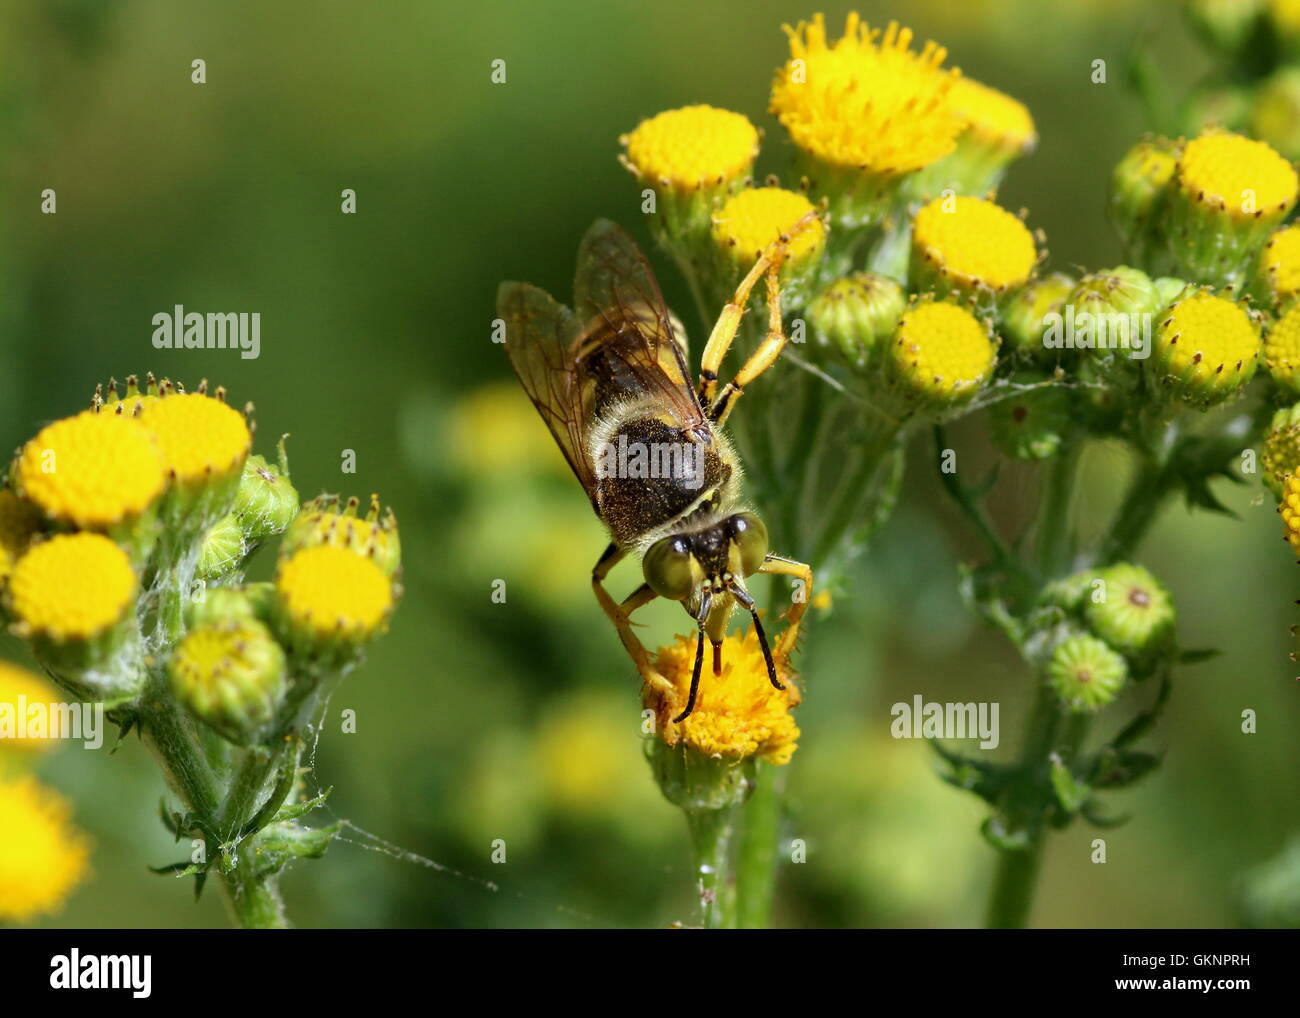 European Bembix rostrata Sand wasp foraging on a yellow flower Stock Photo